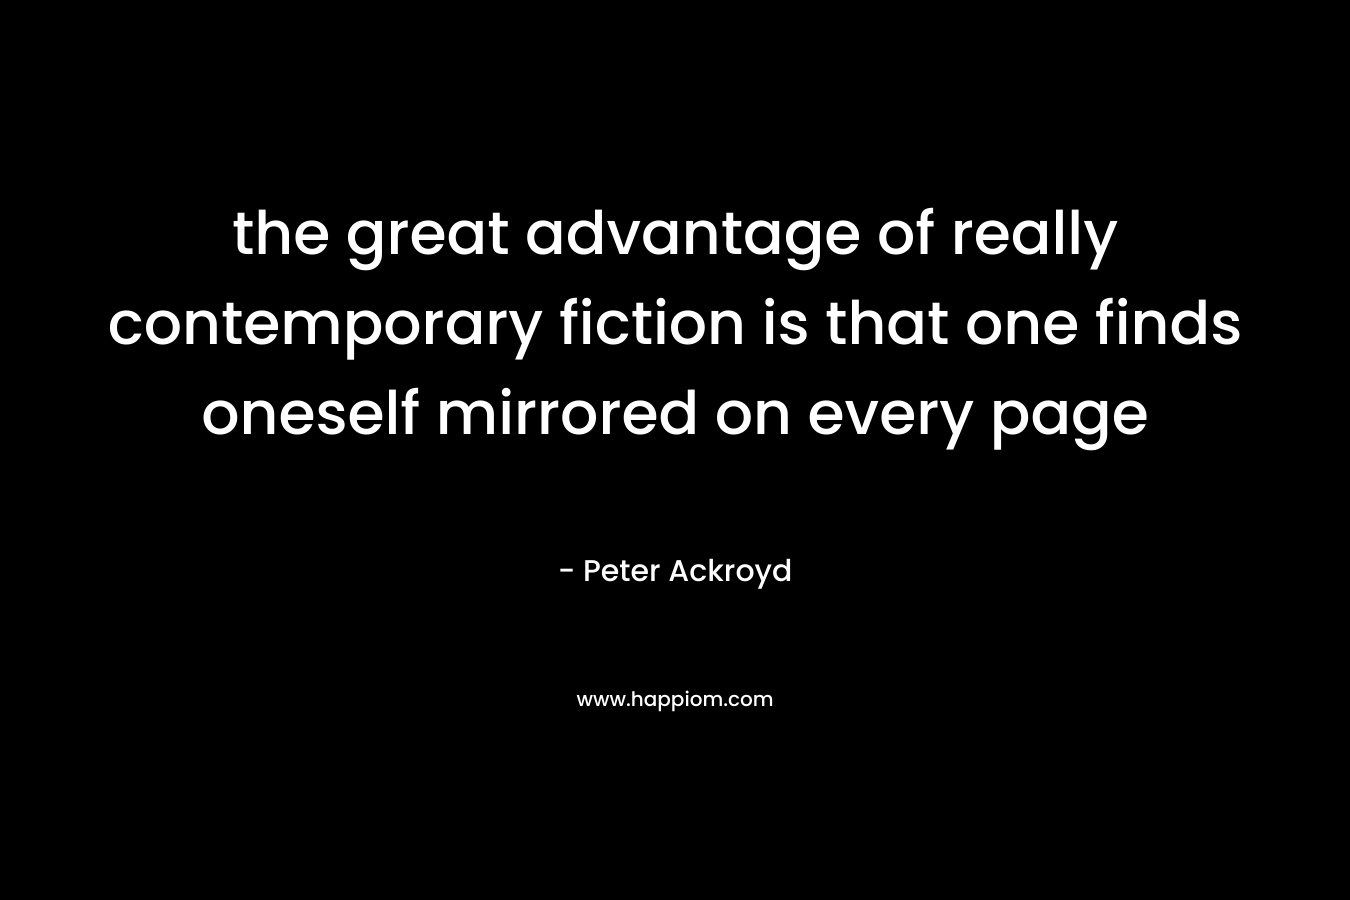 the great advantage of really contemporary fiction is that one finds oneself mirrored on every page – Peter Ackroyd